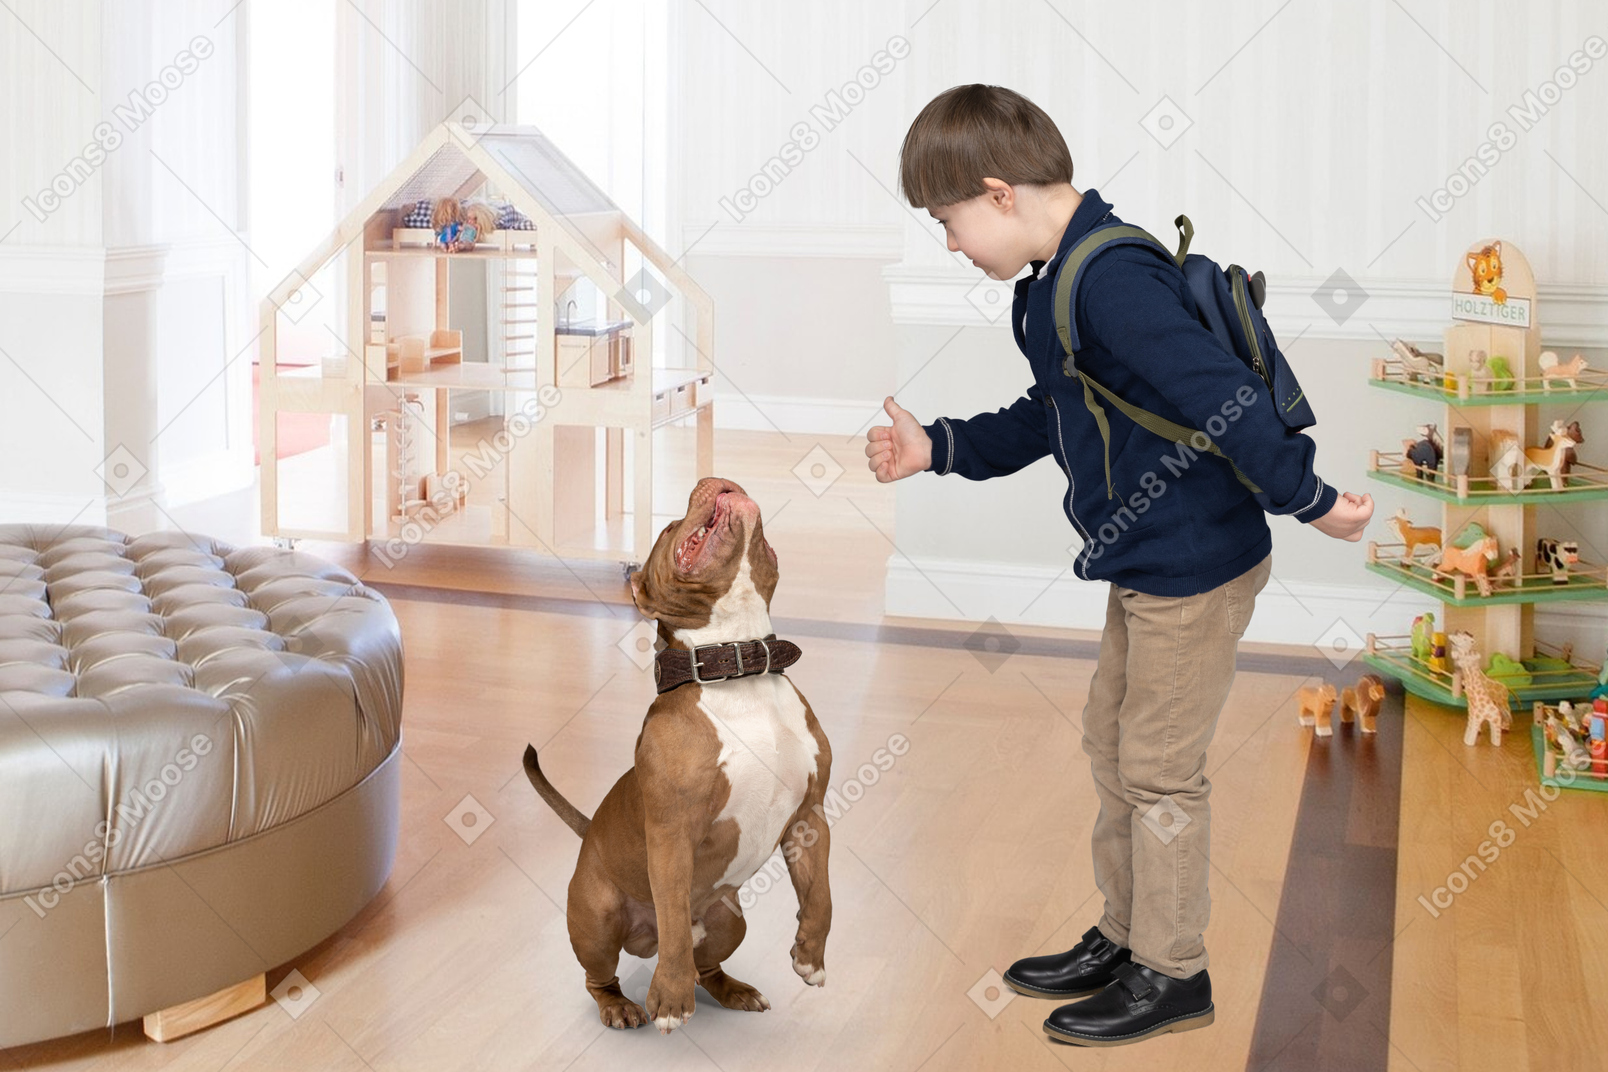 A young boy giving thumbs up to a dog